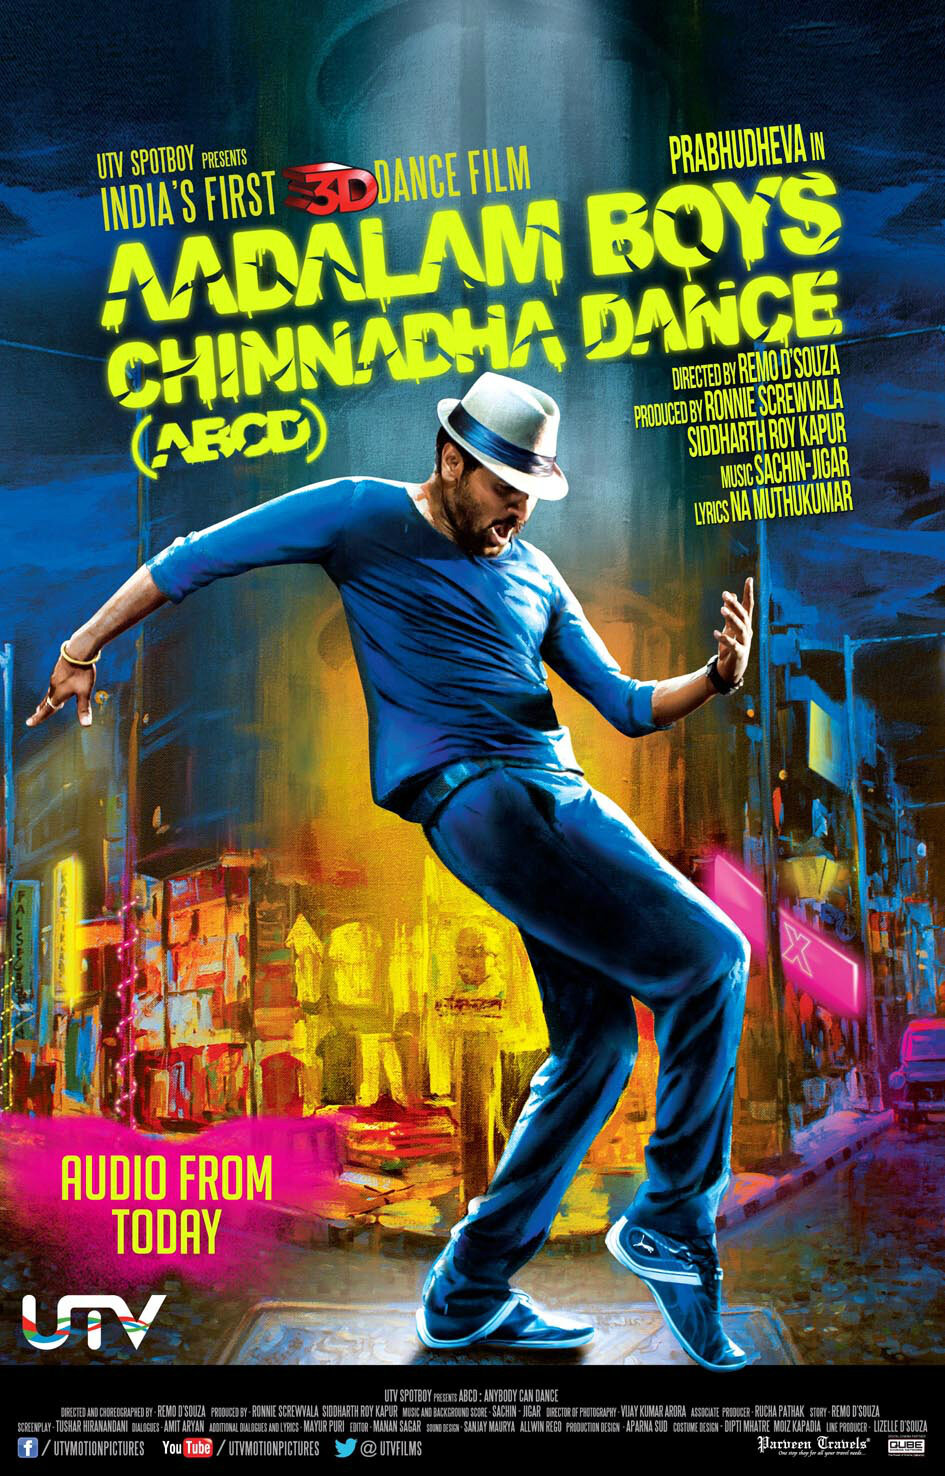 ABCD (Any Body Can Dance) Main Poster